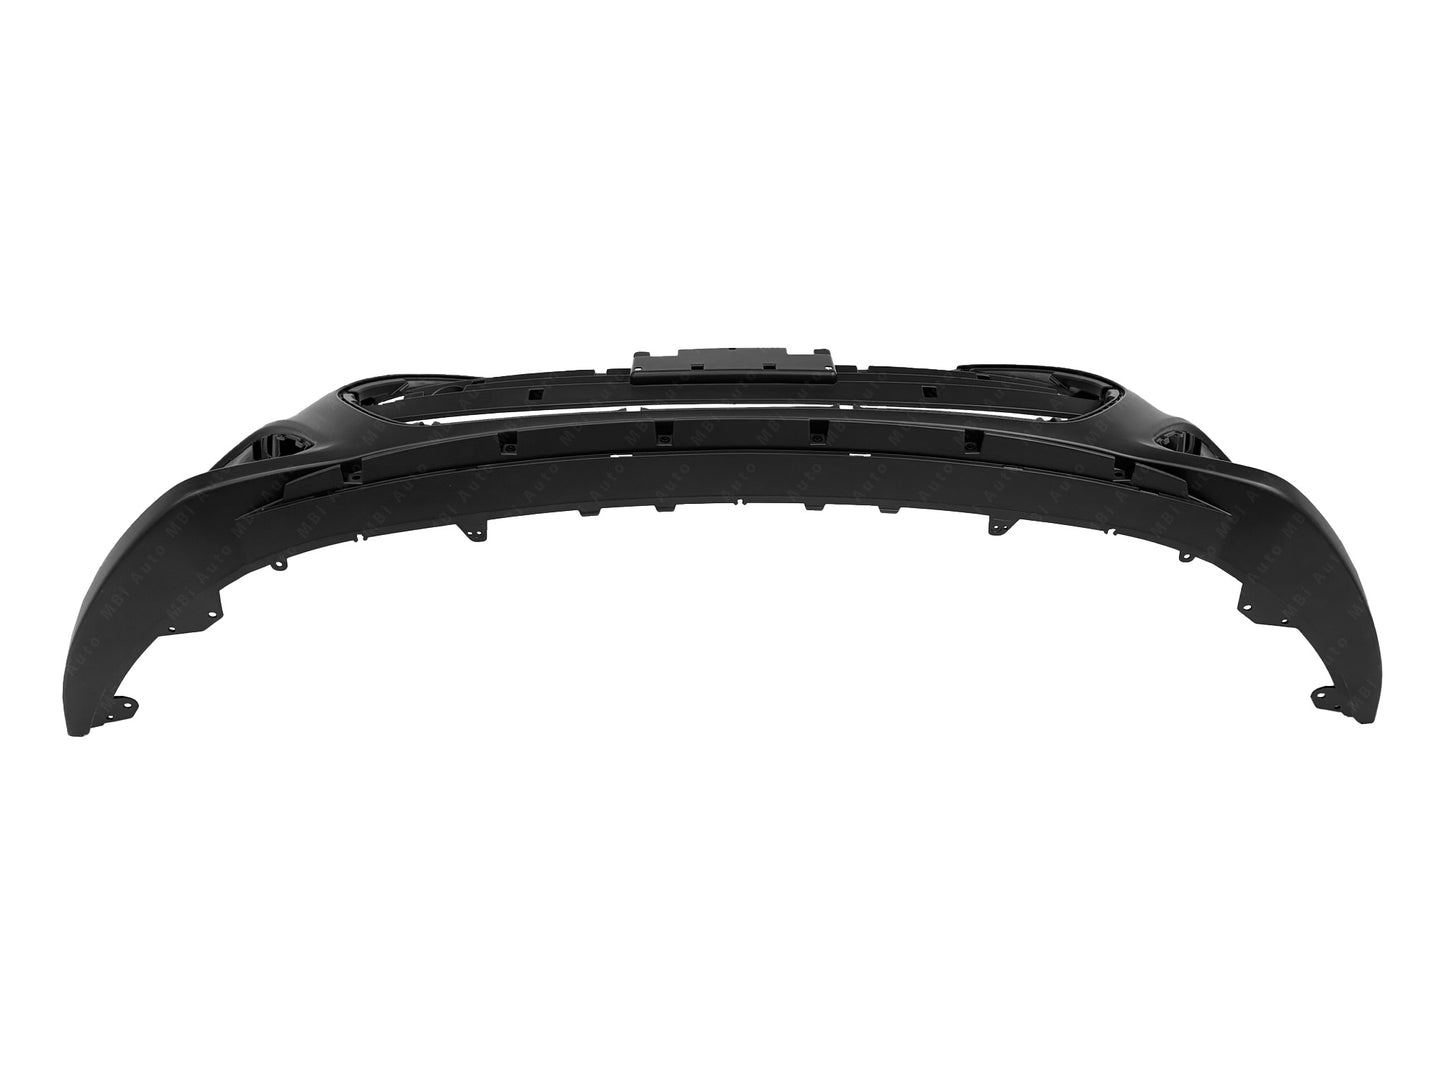 Hyundai Veloster 2013 - 2017 Front Bumper Cover 13 - 17 HY1000194